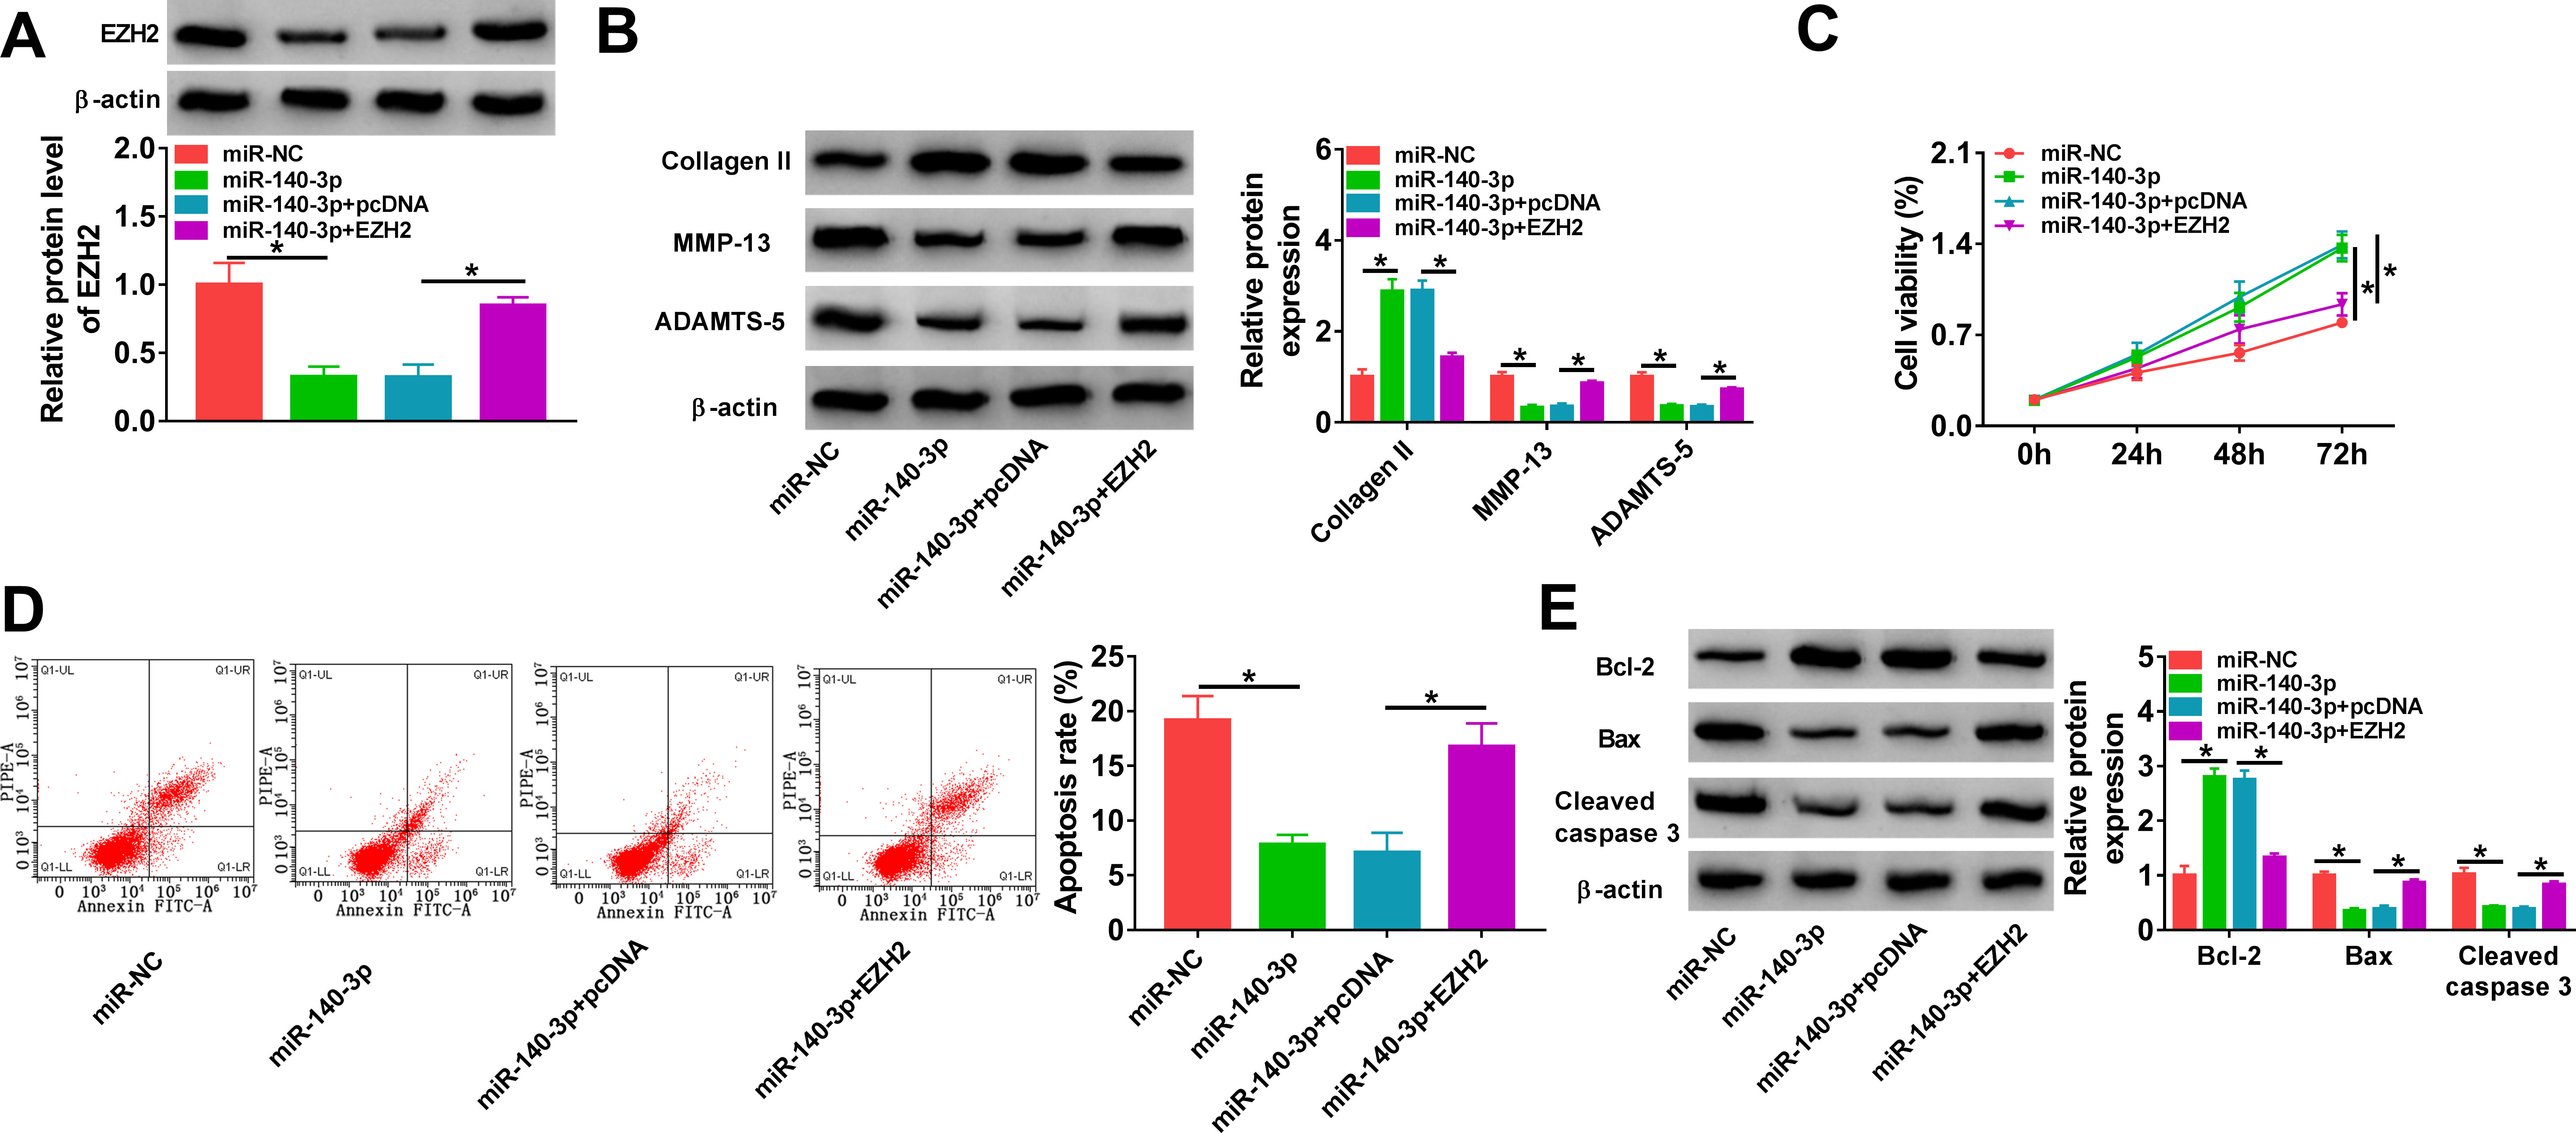 Fig. 6 
            MicroRNA (miR)-140-3p protects chondrocytes against interleukin (IL)-1β-induced dysfunction through enhancer of zeste homolog 2 (EZH2). a) to e) C28/I2 cells were transfected with miR-NC, miR-140-3p, miR-140-3p+pcDNA, or miR-140-3p+EZH2, followed by treatment with IL-1β (10 ng/l) for 24 hours. a) Western blot analysis of EZH2 protein level in cells. b) Western blot analysis of matrix metallopeptidase 13 (MMP-13), a disintegrin and metalloproteinase with thrombospondin motifs (ADAMTS)-5, and collagen II protein levels in cells. c) Cell counting kit-8 (CCK-8) assay for cell proliferation. d) Flow cytometry for cell apoptosis. e) Detection of B-cell lymphoma-2 (Bcl-2), Bcl-2-associated X (Bax), and cleaved caspase 3 protein levels in cells using Western blot. One-way analysis of variance (ANOVA), *p < 0.05. All of the experiments were performed in triplicate.
          